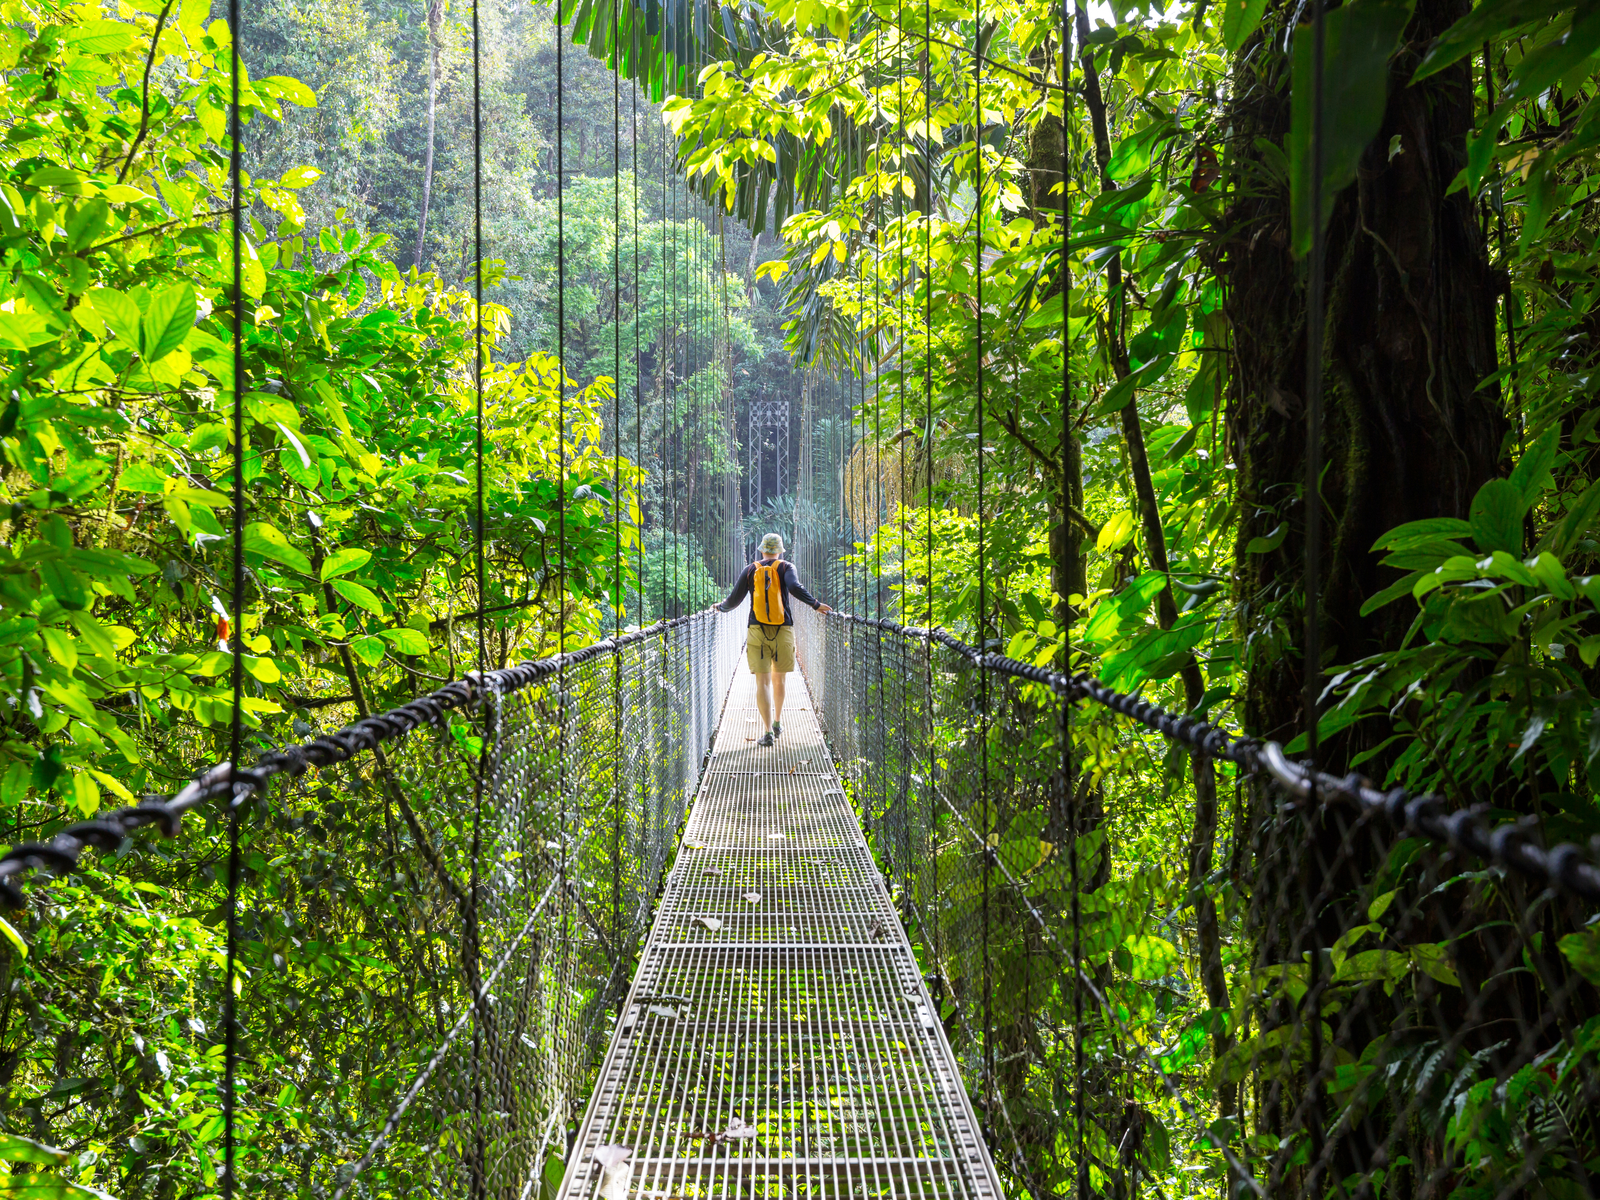 Woman walking the suspension bridge over the jungle gorge during her stay at one of the best all-inclusive resorts in Costa Rica